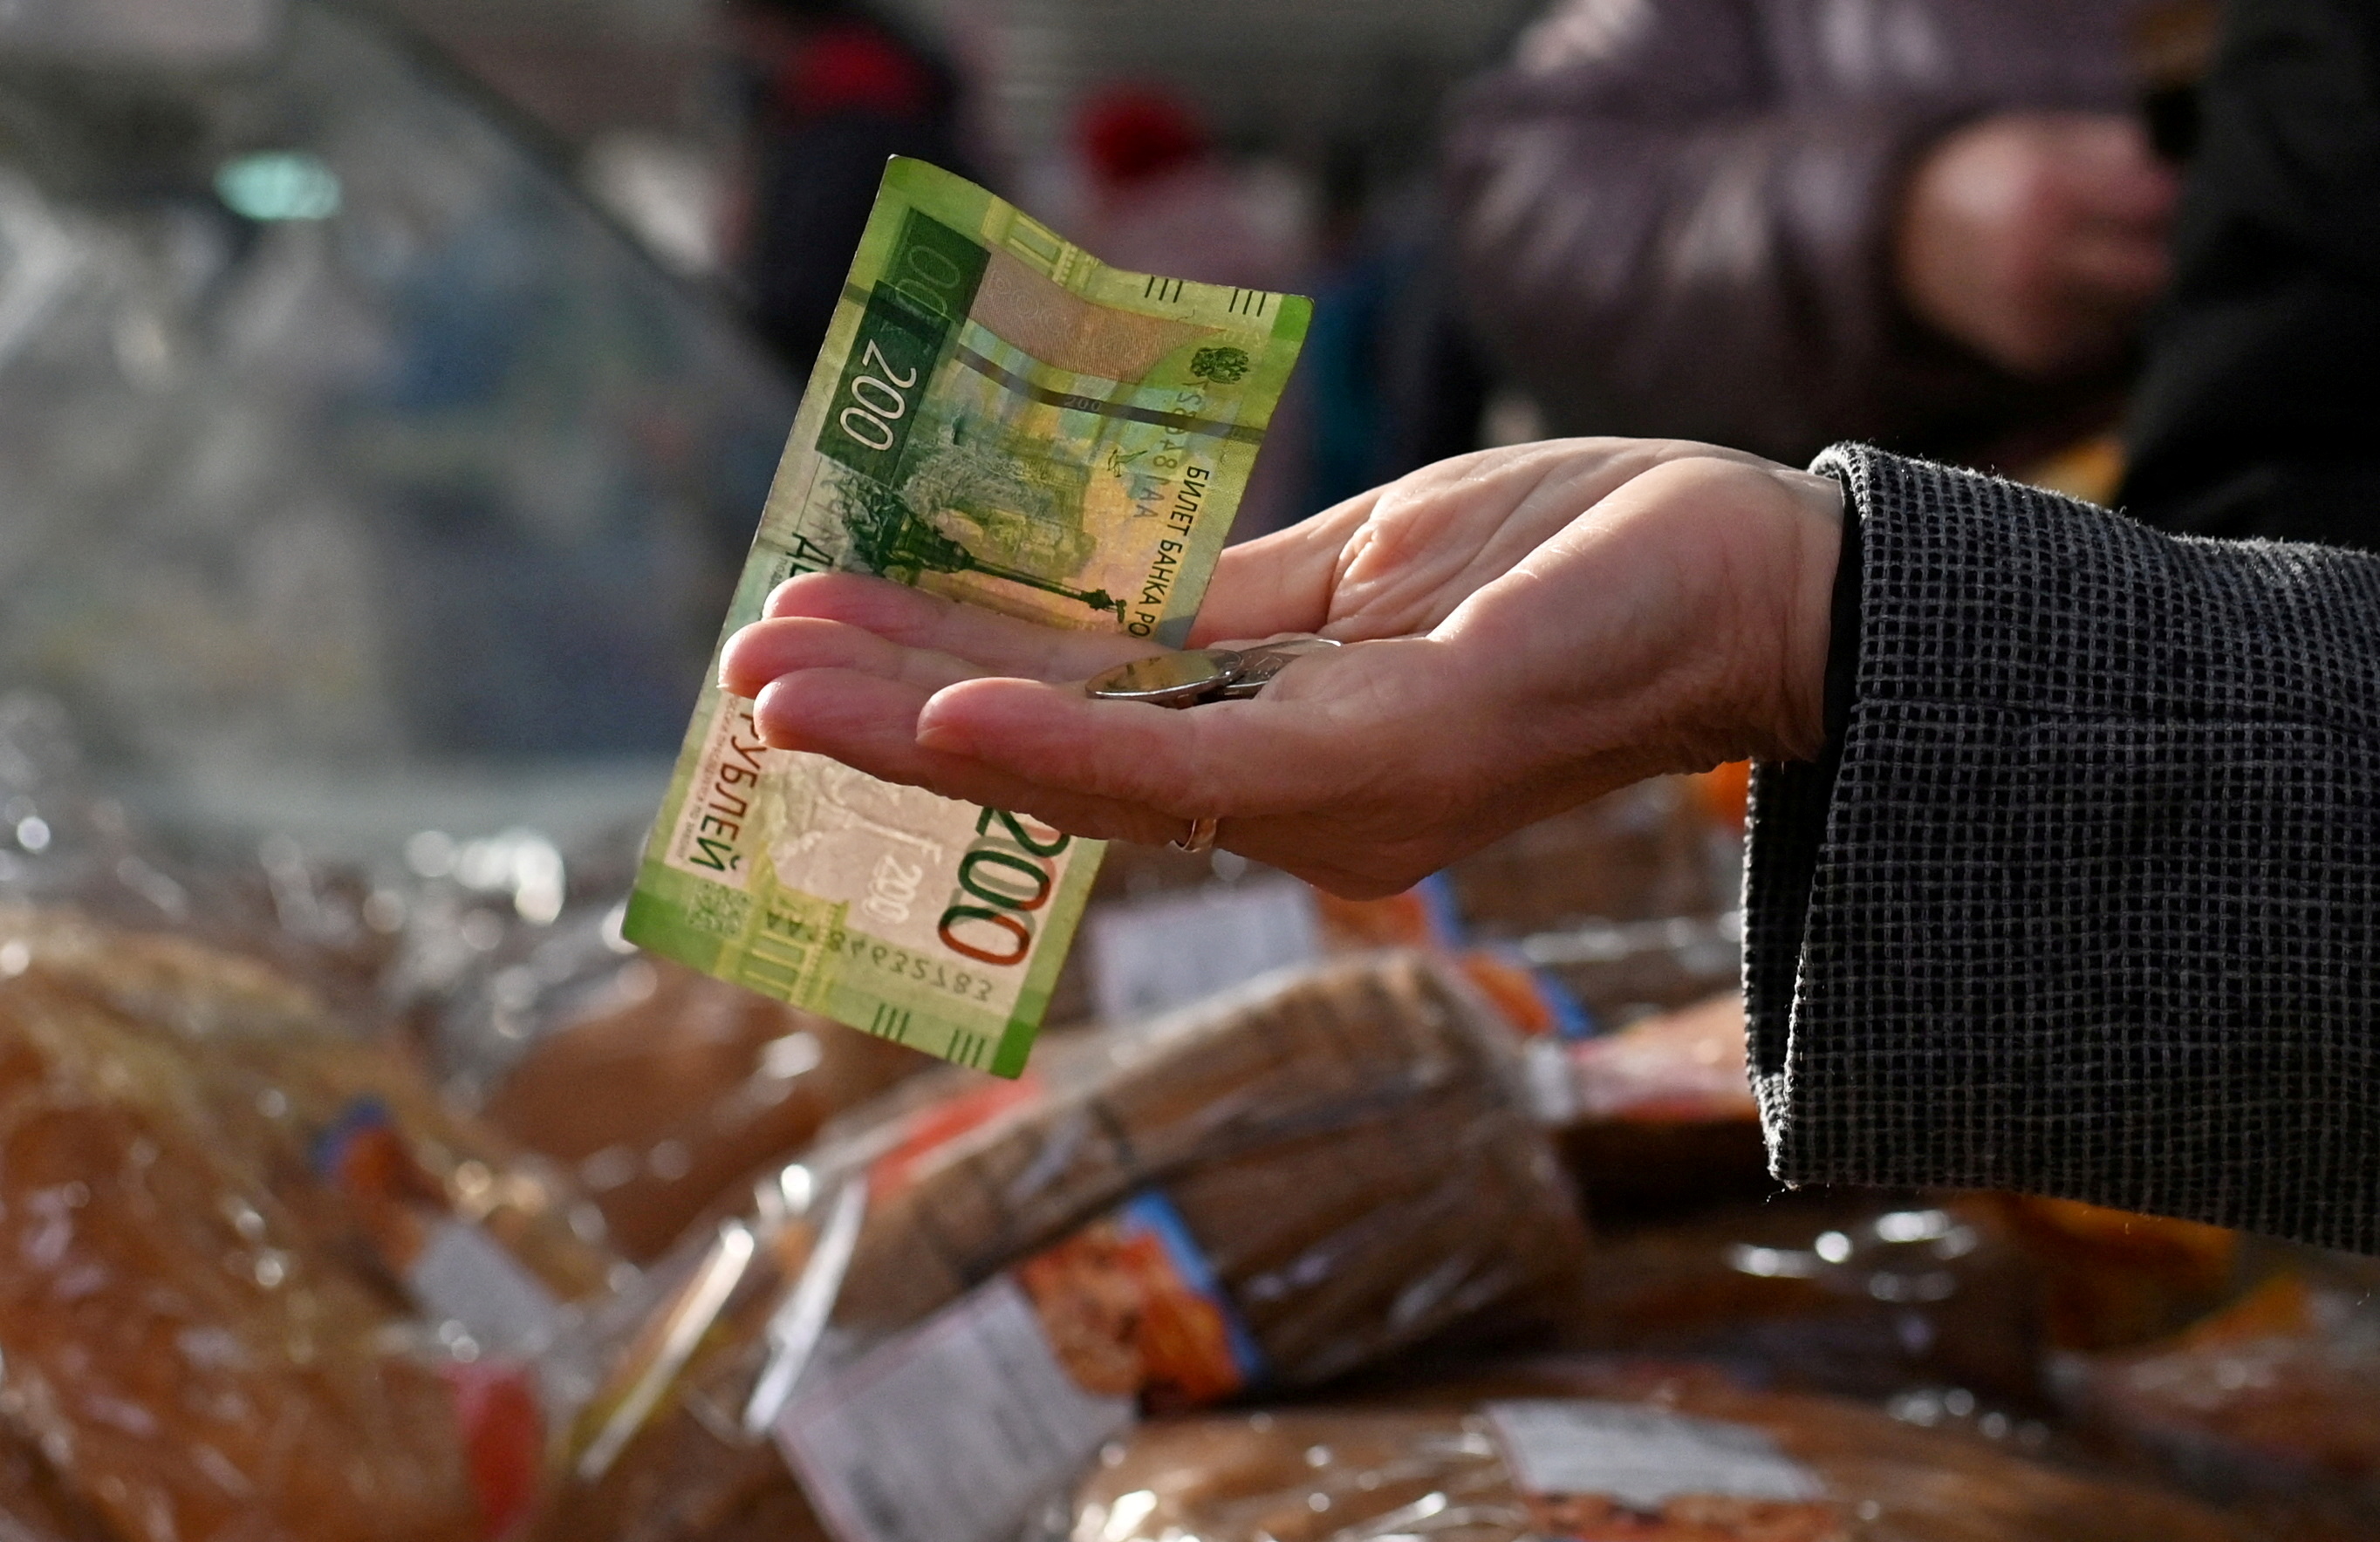 A customer hands over Russian rouble banknotes and coins to a vendor at a market in Omsk